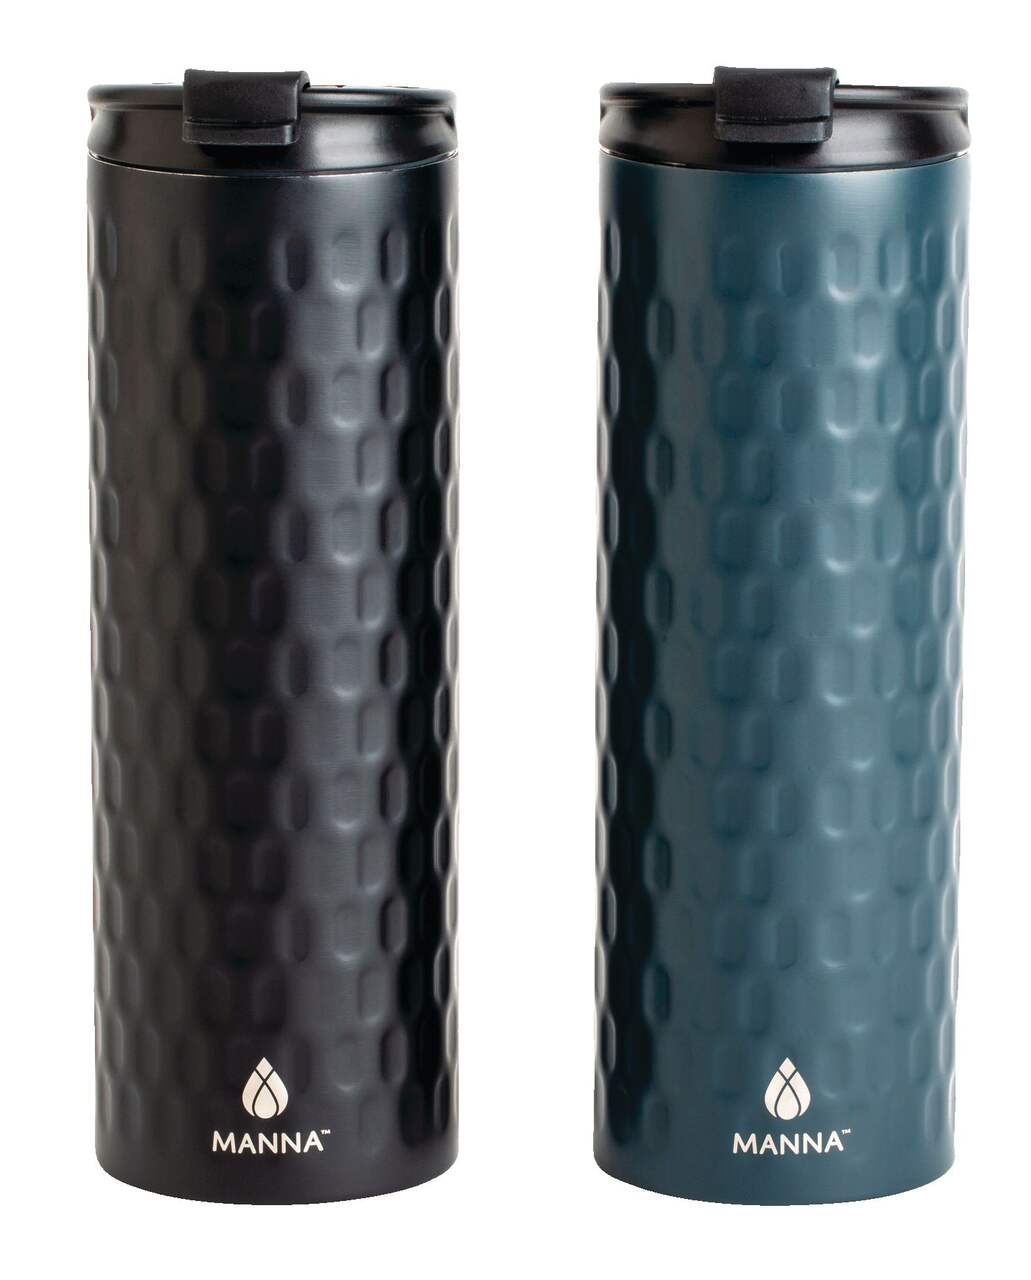 https://media-www.canadiantire.ca/product/living/kitchen/food-storage/3993521/manna-quilted-travel-mug-2-pack-304936c6-e49a-4c07-a139-bda3f6c8c50c-jpgrendition.jpg?imdensity=1&imwidth=640&impolicy=mZoom